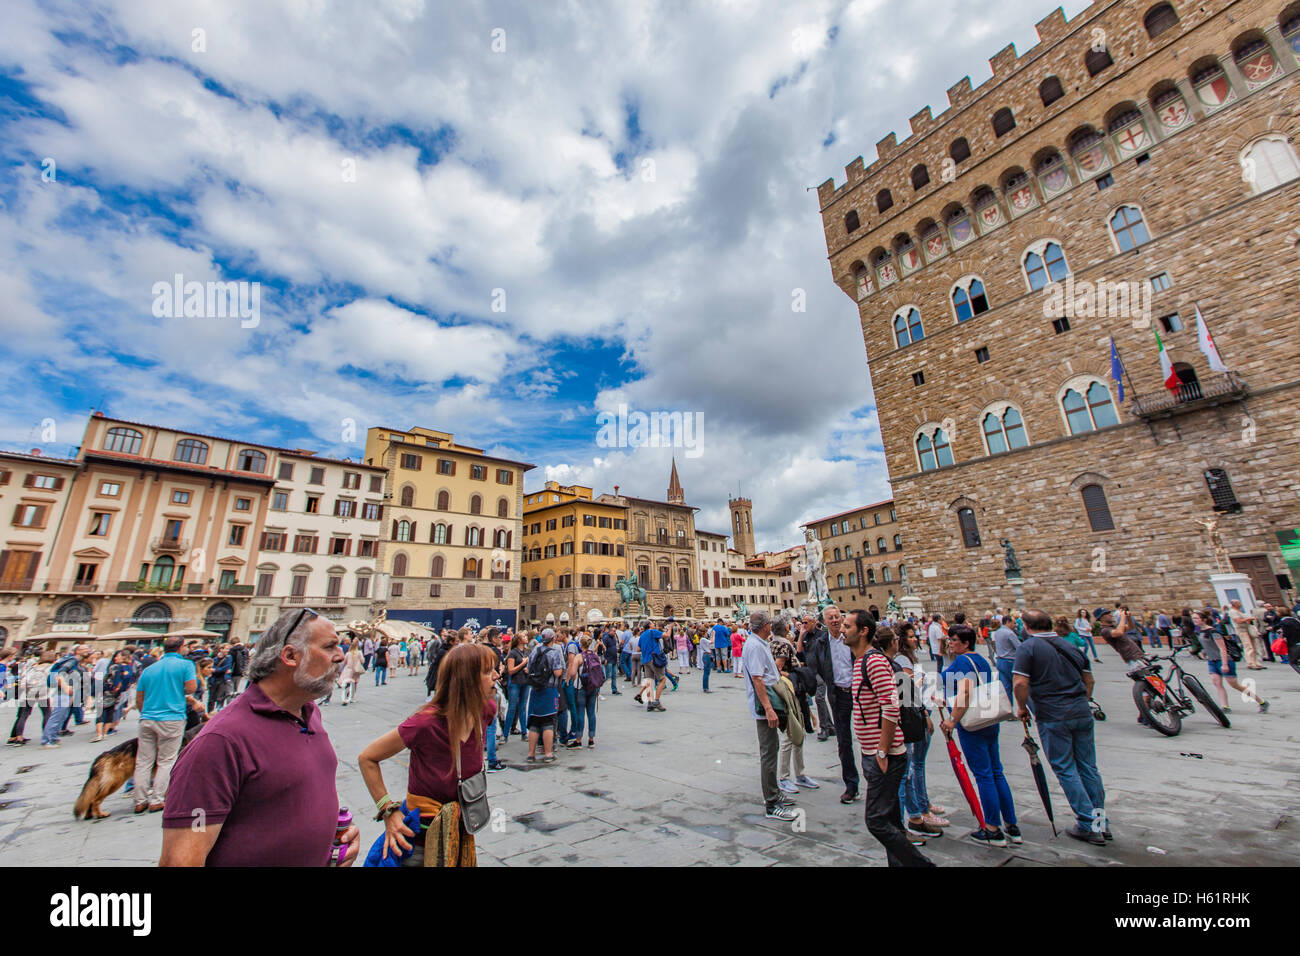 FLORENCE, ITALY - SEPTEMBER 18, 2016: Unidentified people at Piazza della Signoria in Florence, Italy. It is the focal point of Stock Photo